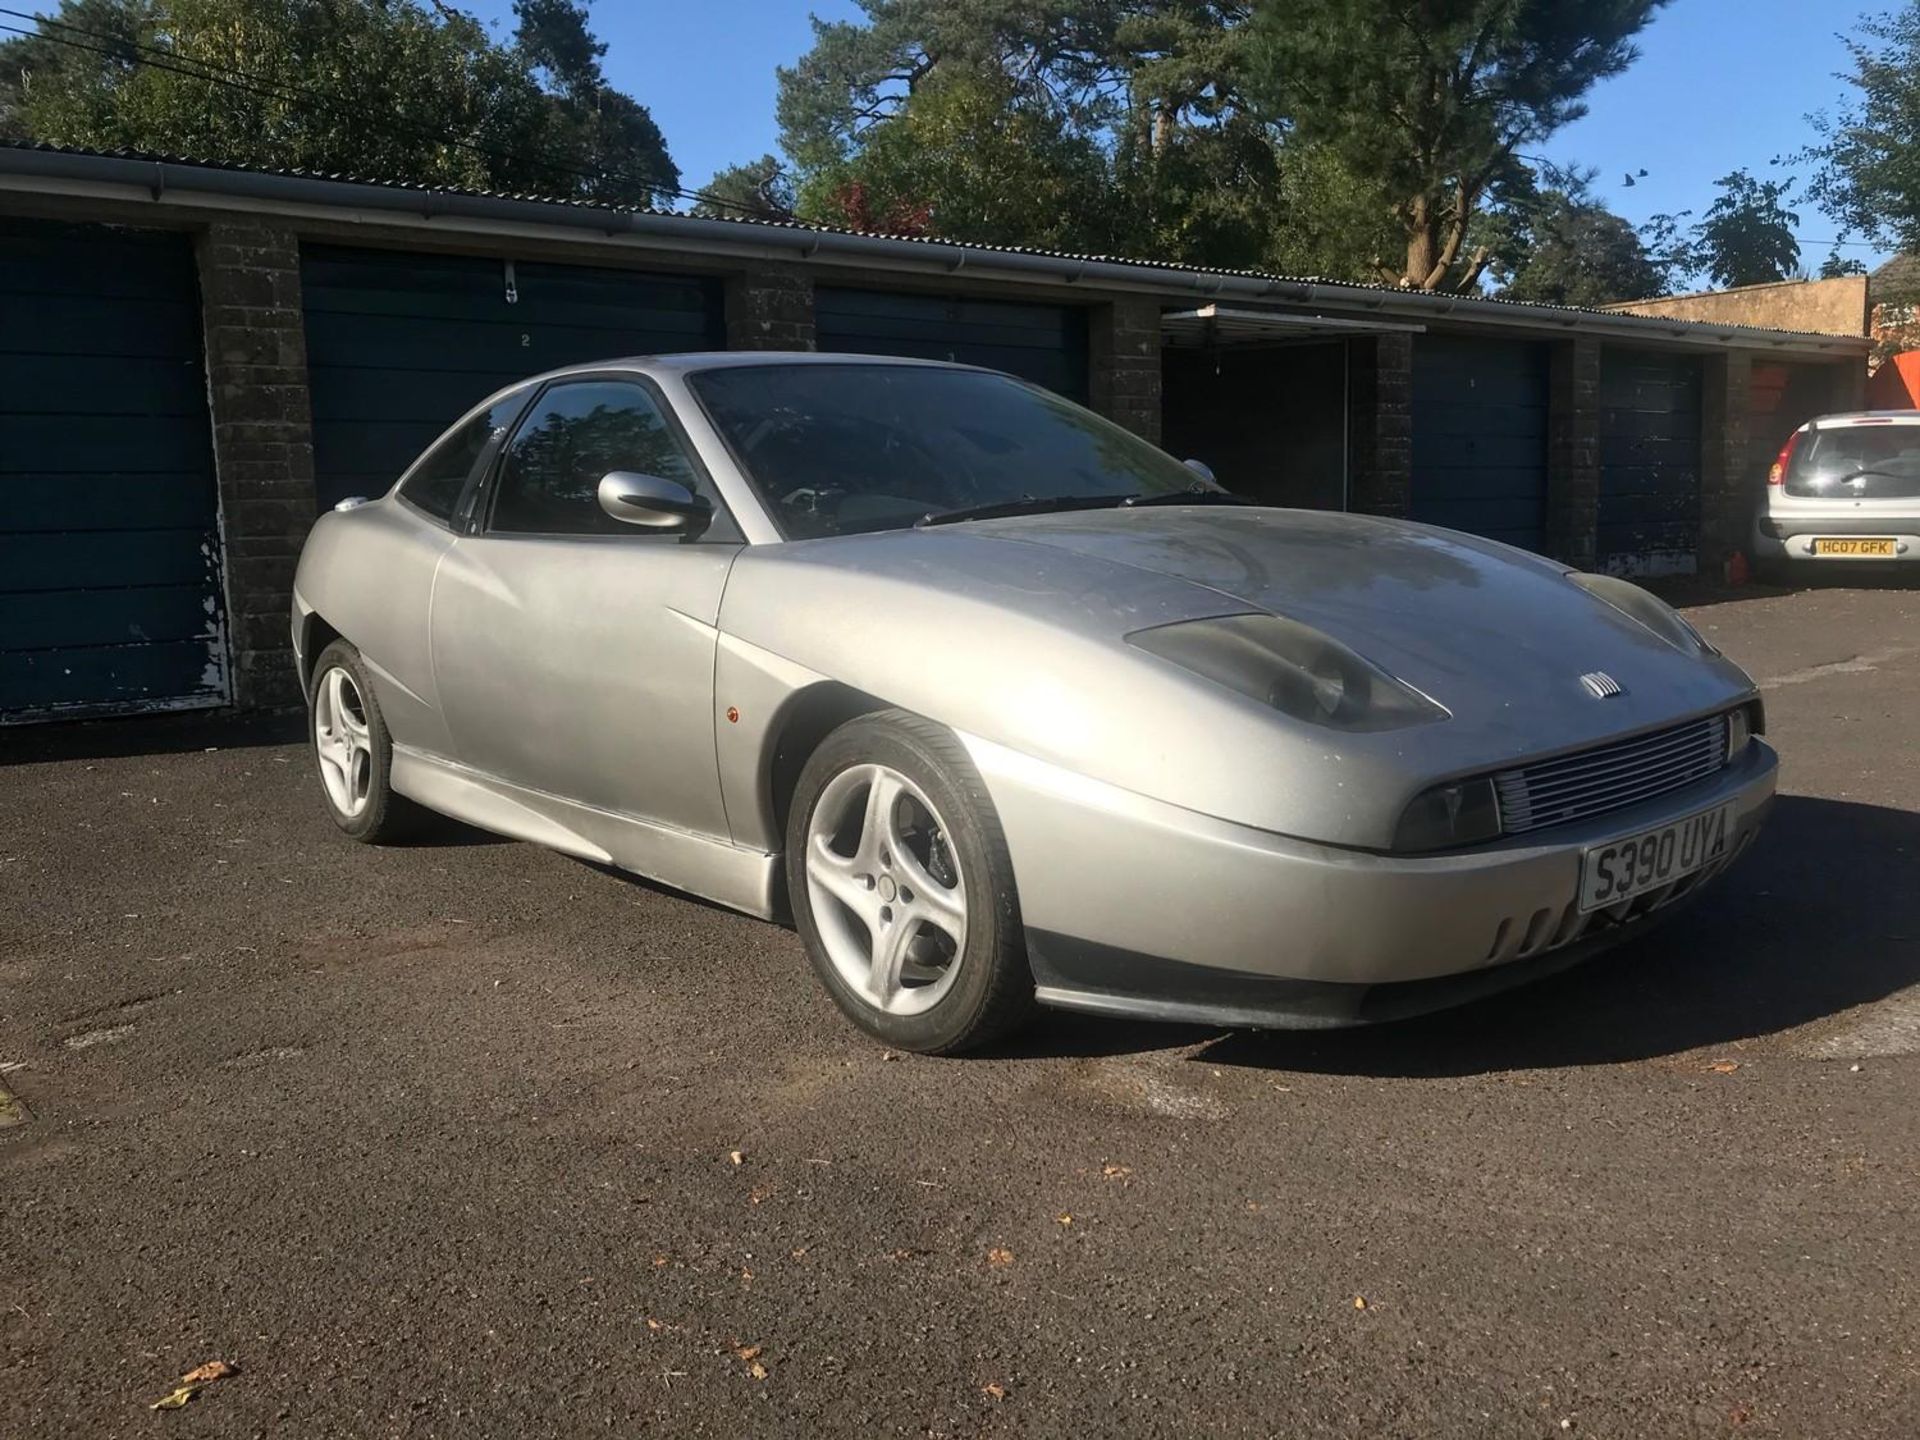 A 1998 Fiat Coupe 20V Turbo Registration number S390 UYA Grey Vehicle location: Yeovil All lots in